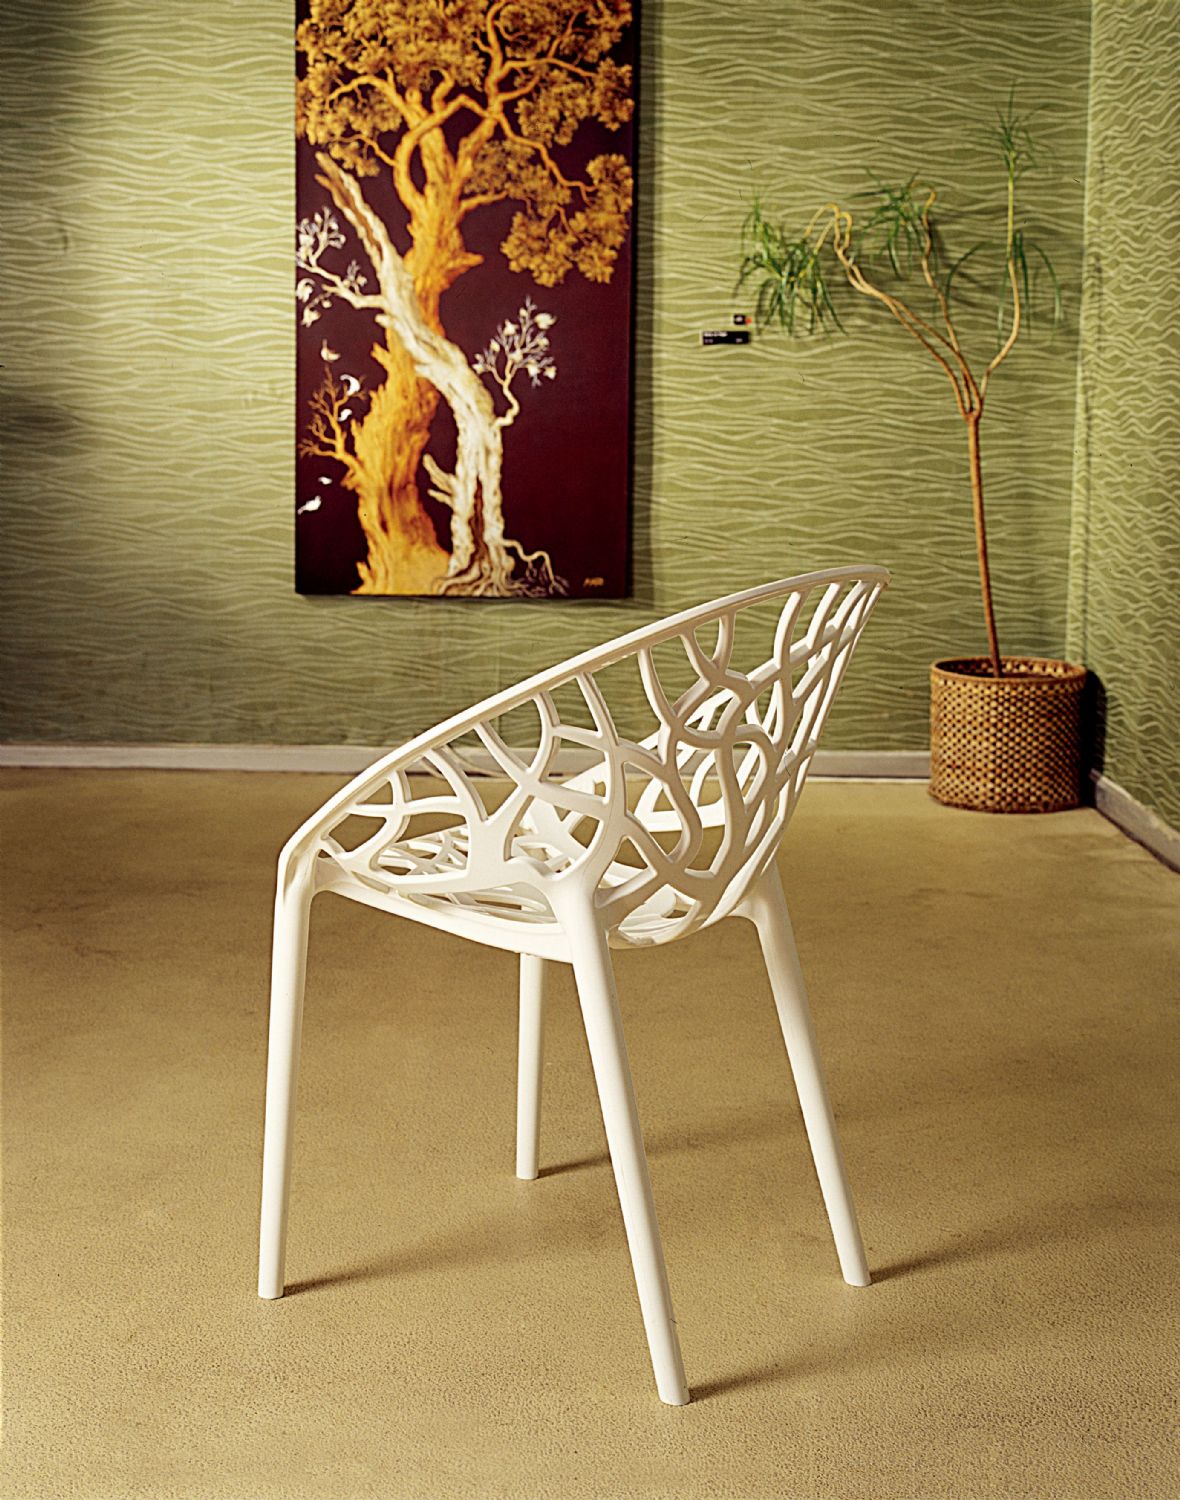 Crystal Polycarbonate Modern Dining Chair Glossy White ISP052-GWHI - 1